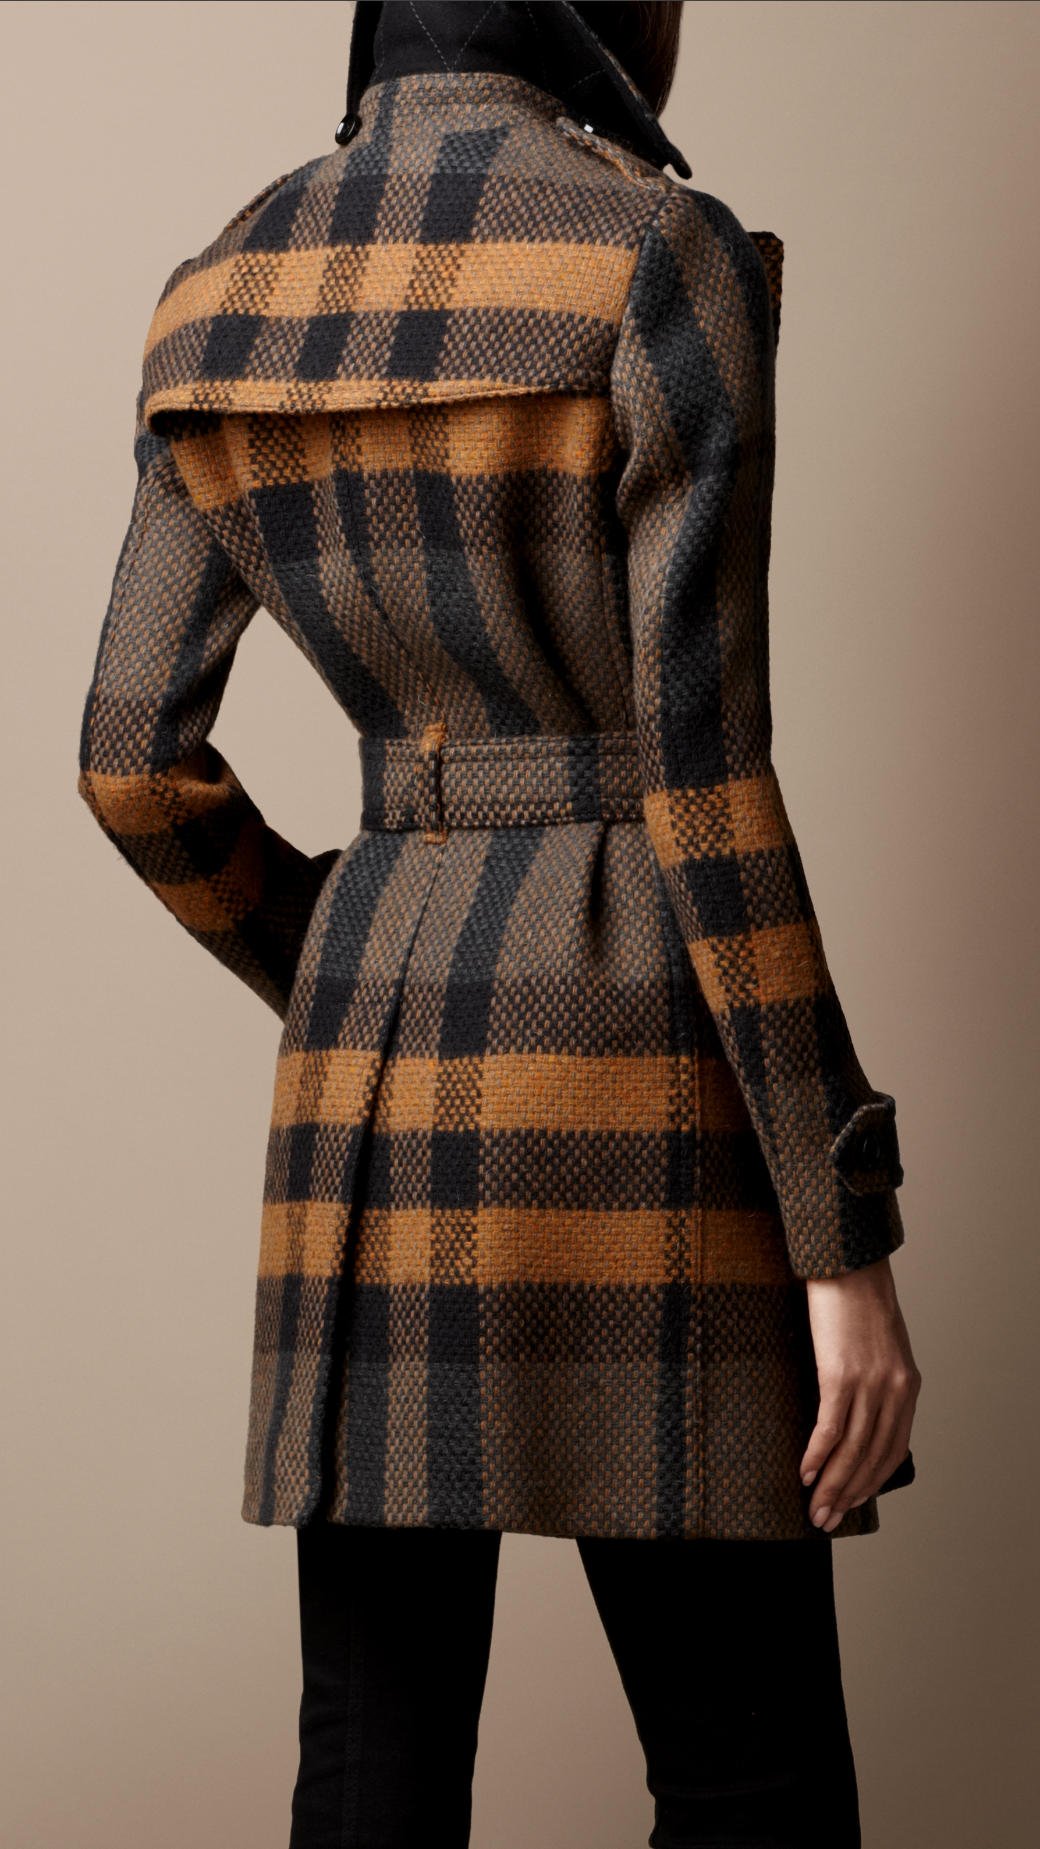 Lyst - Burberry brit Midlength Woven Check Wool Trench Coat in Orange